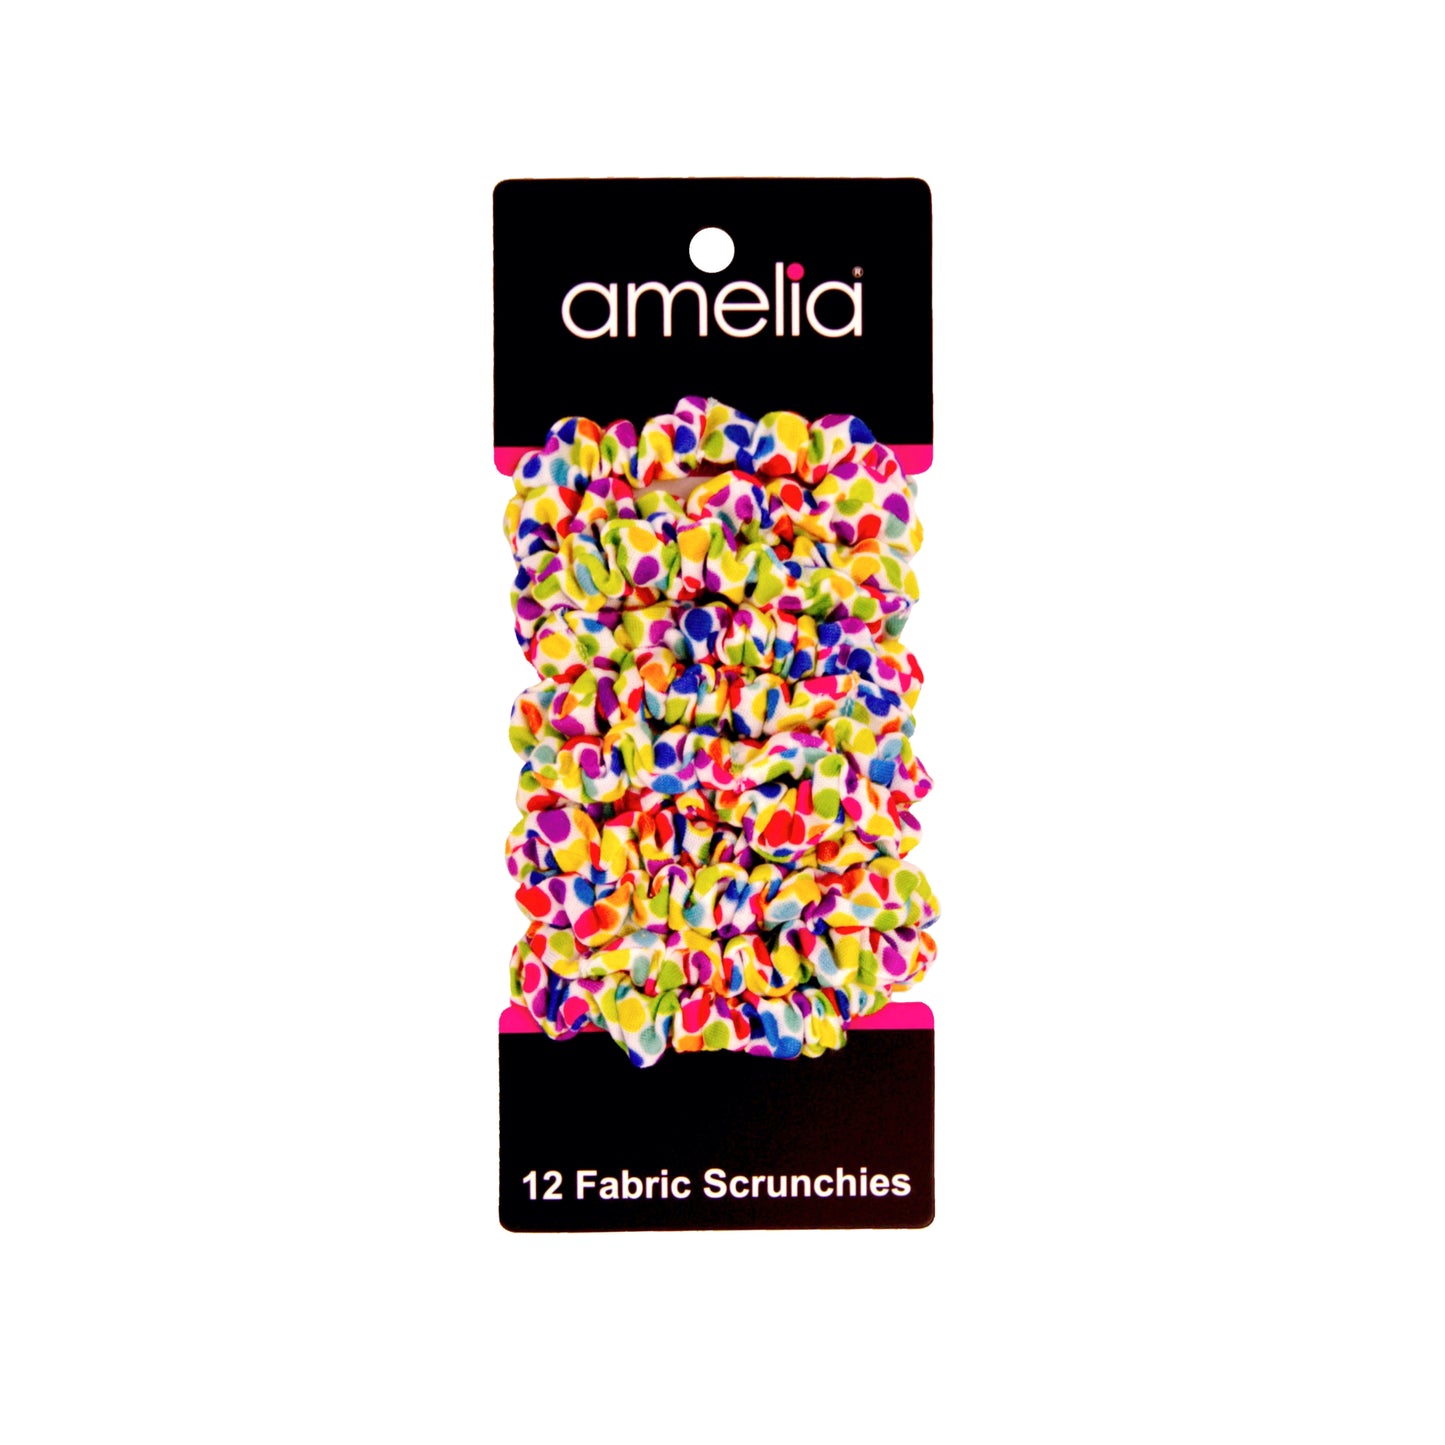 Amelia Beauty, Rainbow Dots Jersey Scrunchies, 2.25in Diameter, Gentle on Hair, Strong Hold, No Snag, No Dents or Creases. 12 Pack